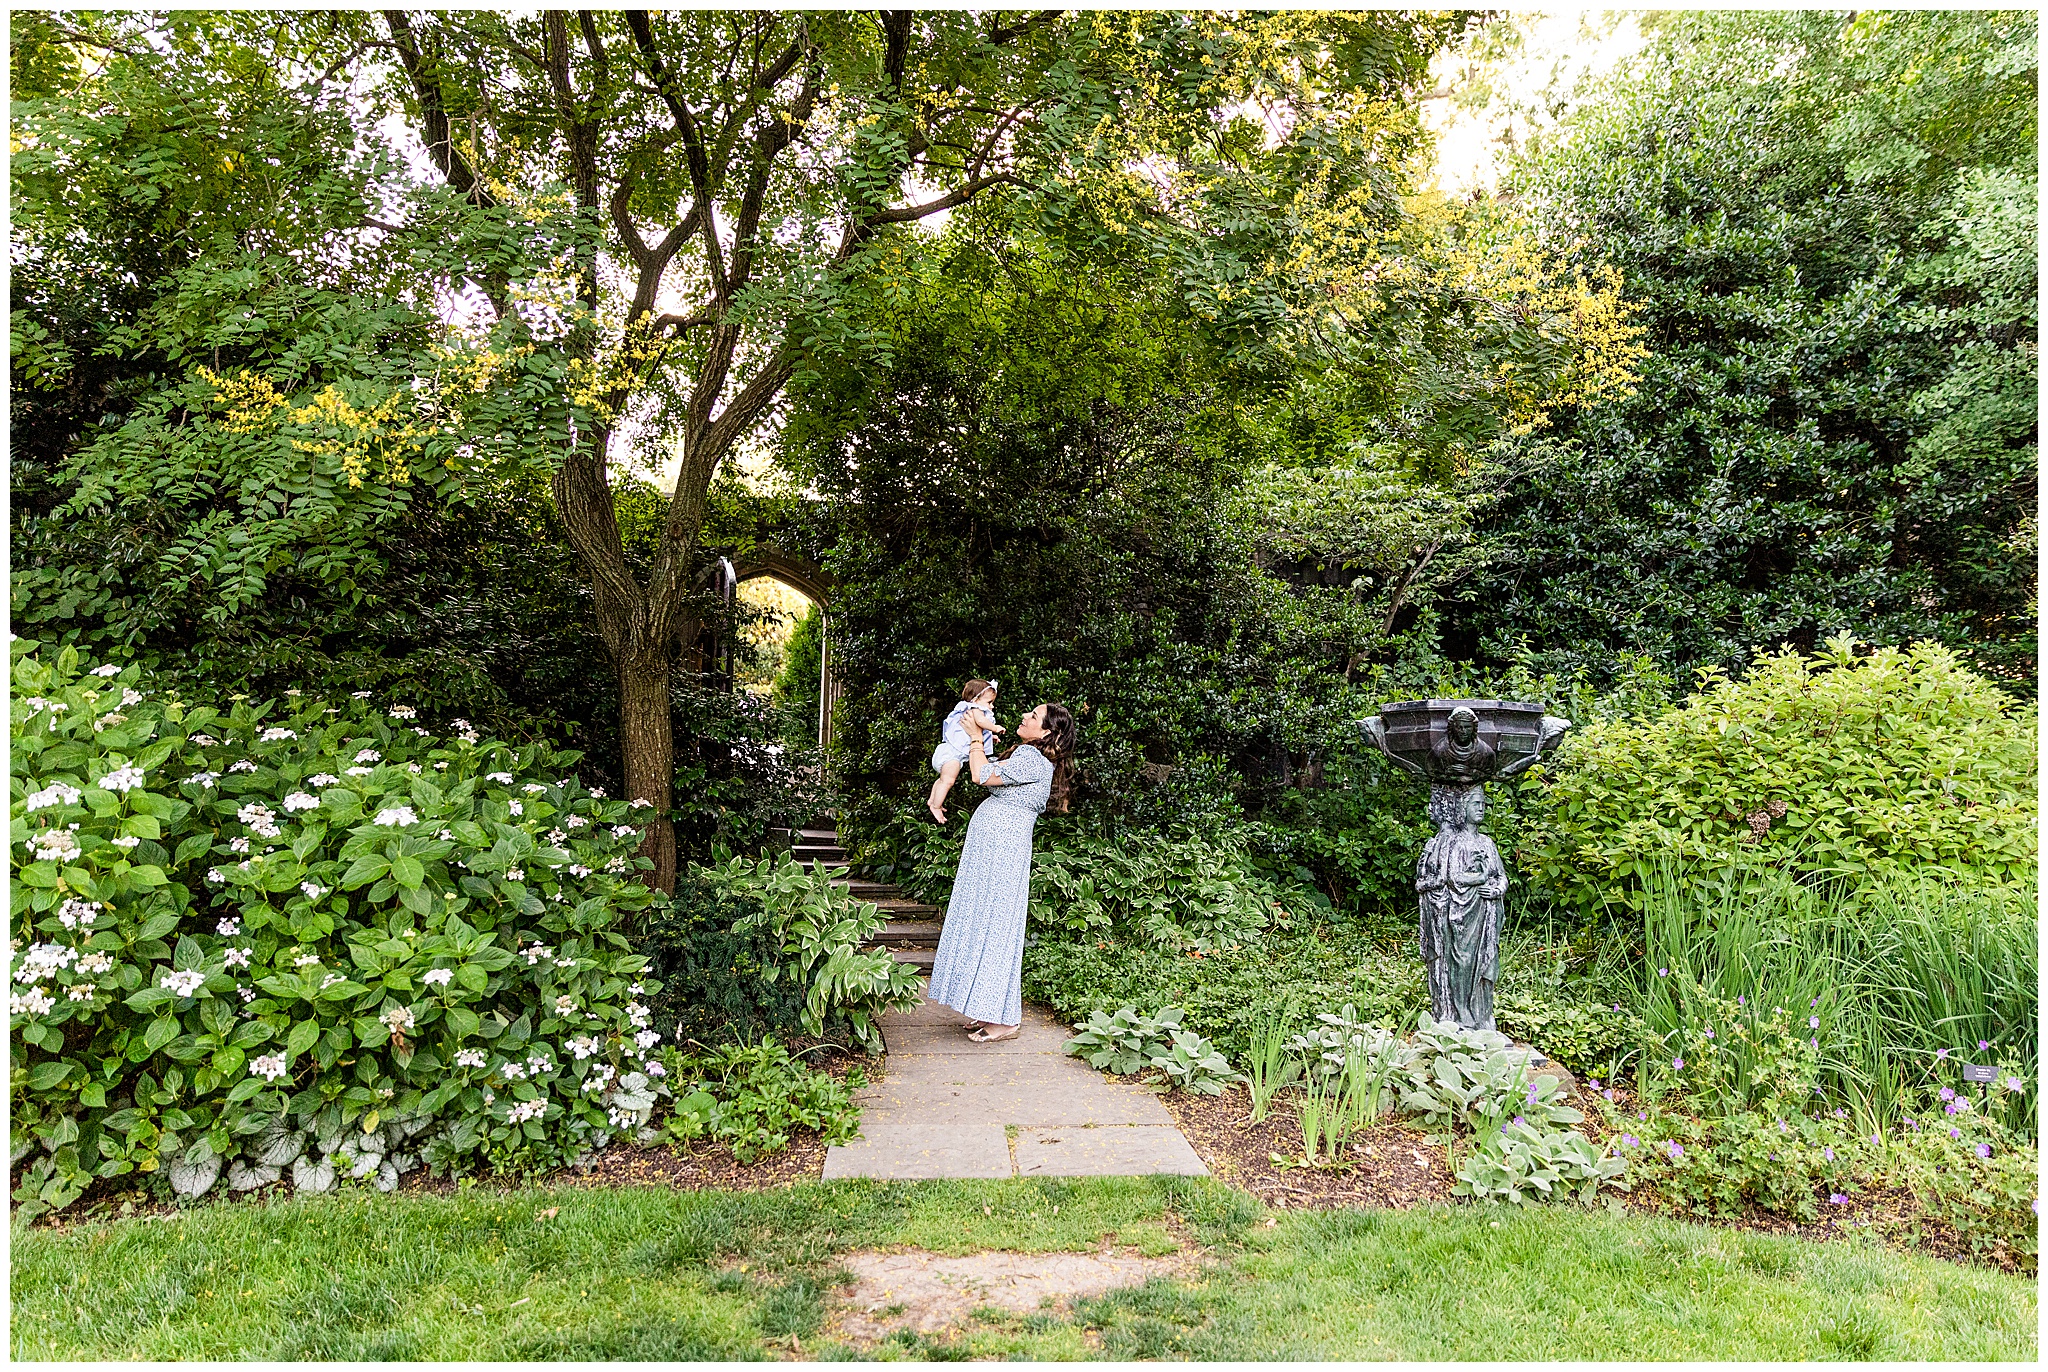 Stunning mom and daughter in Bishop's Garden in Washington, DC by Bethany Brasfield Kofmehl